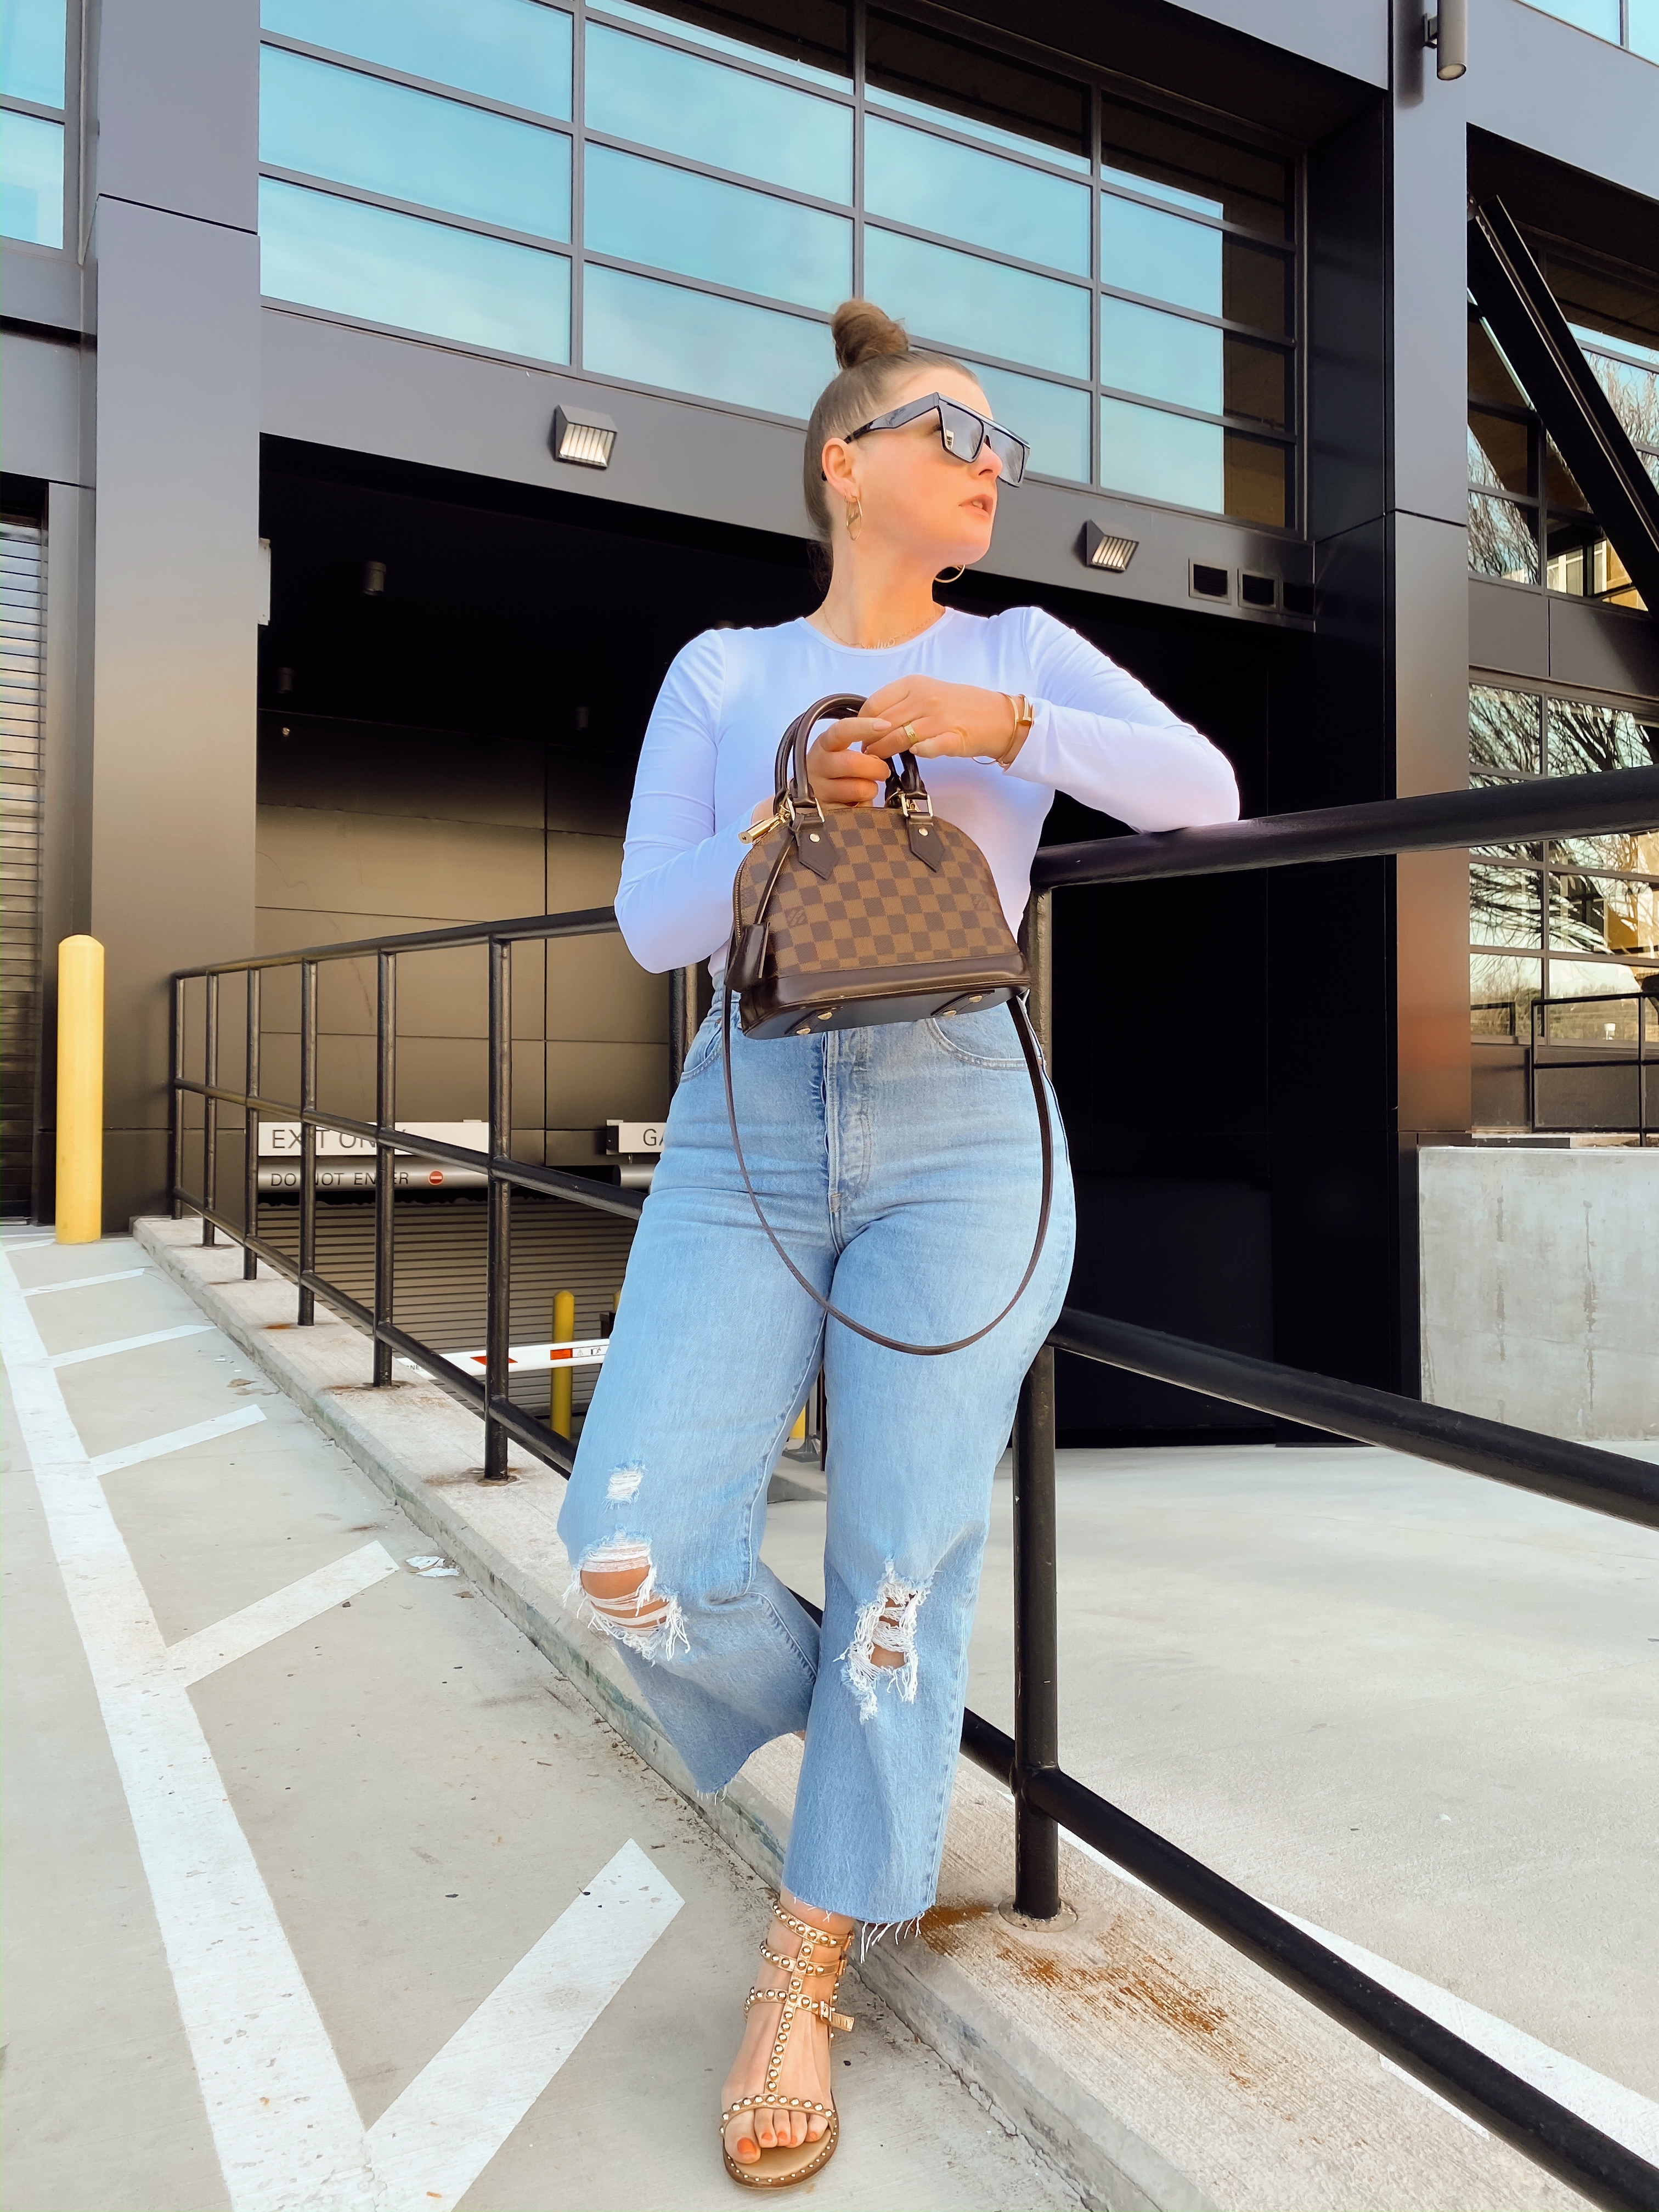 5 WAYS TO WEAR LEVI'S RIBCAGE JEANS FOR SUMMER: http://www.juliamarieb.com/2020/03/11/5-ways-to-wear-levi's-ribcage-jeans-for-spring-|-the-rule-of-5/.  |.  @julia.marie.b